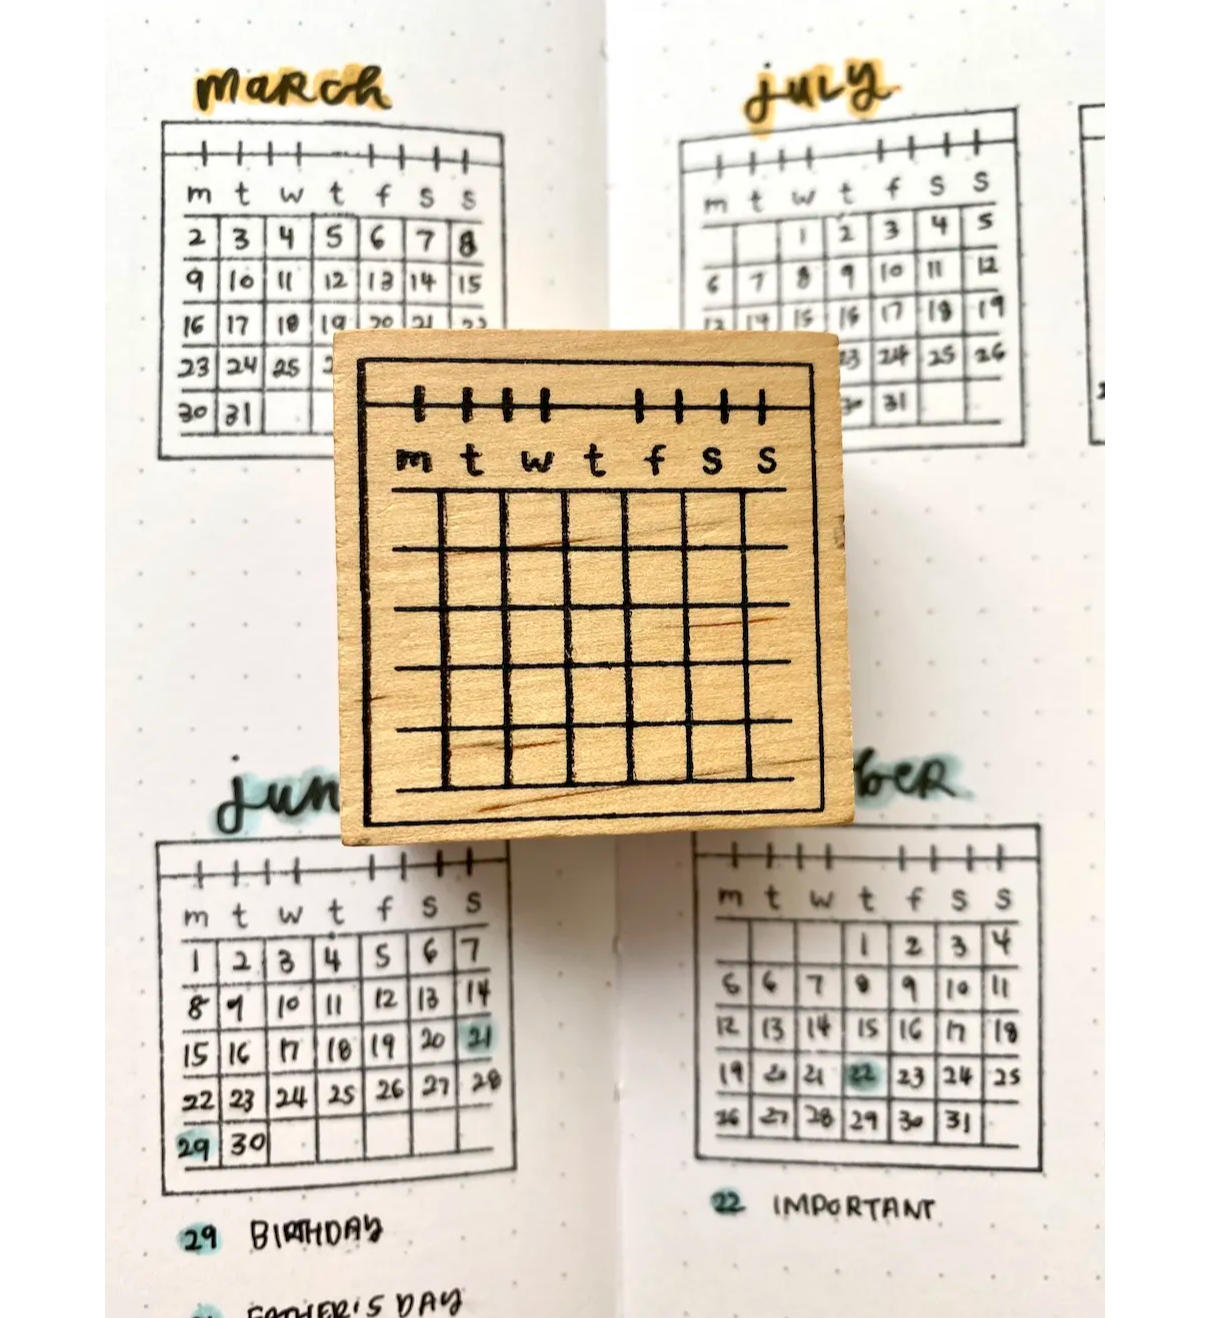 Check Box Checklist bullet journal to do lists Rubber Stamp